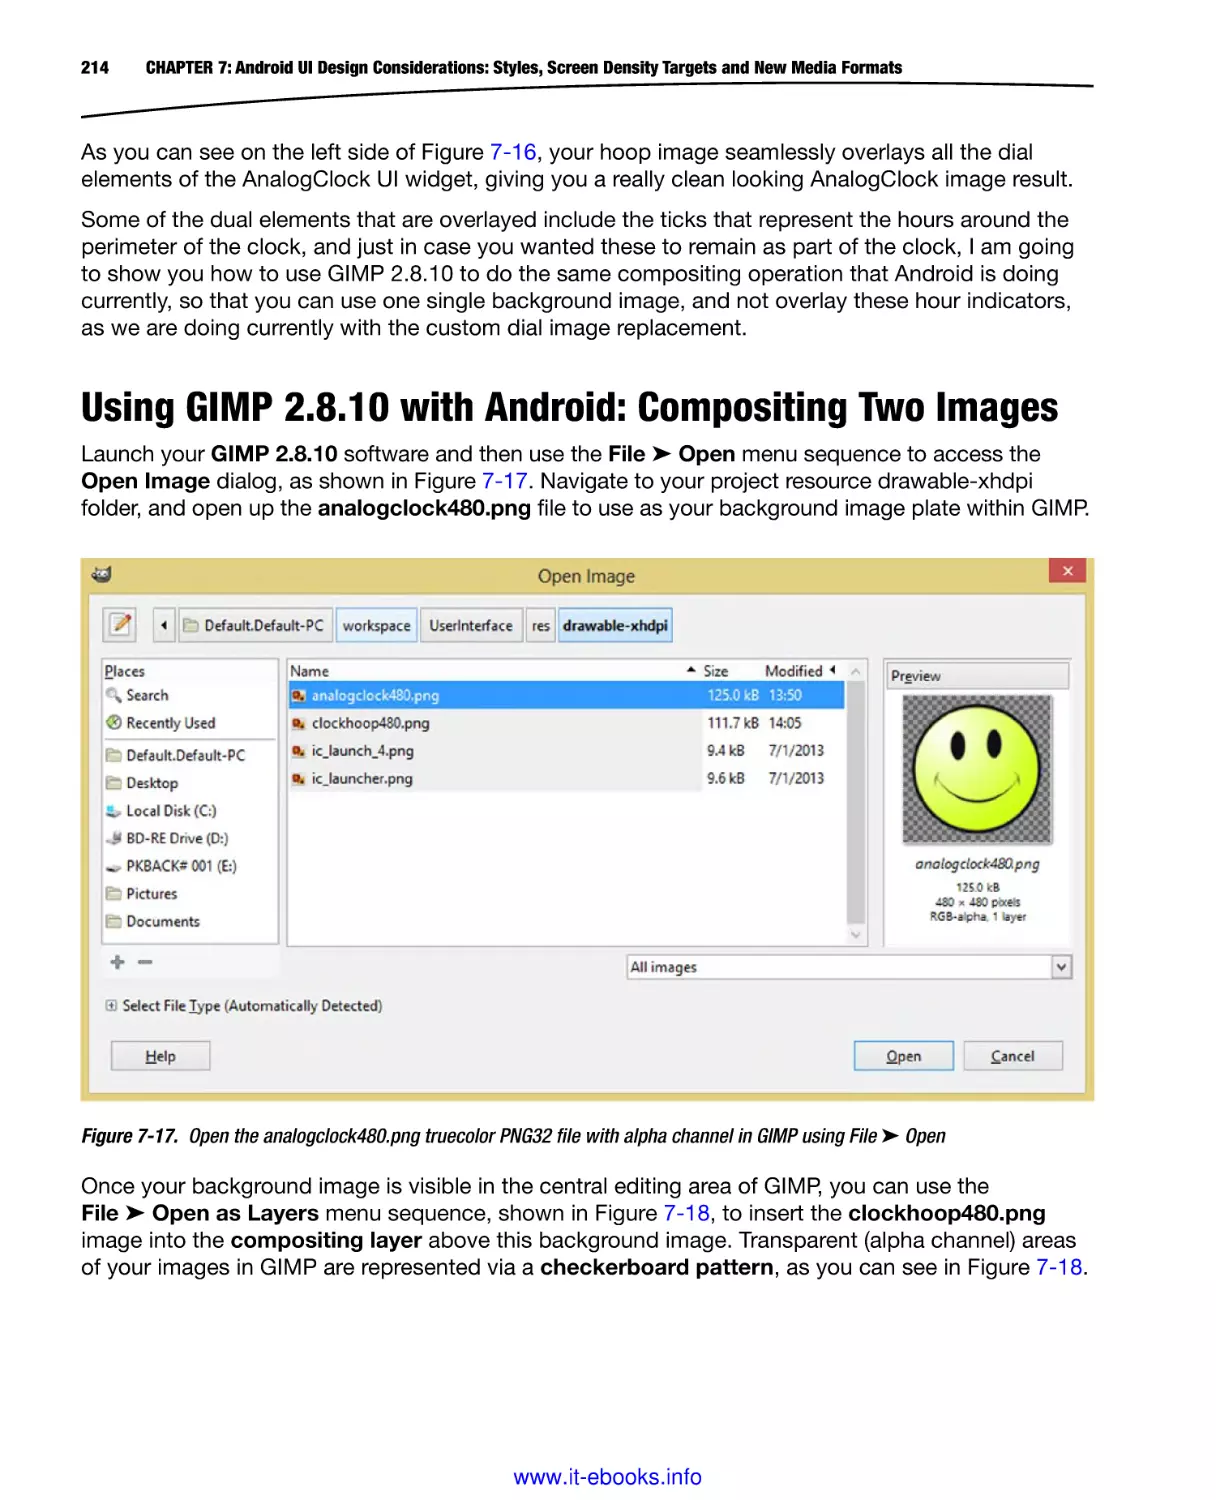 Using GIMP 2.8.10 with Android